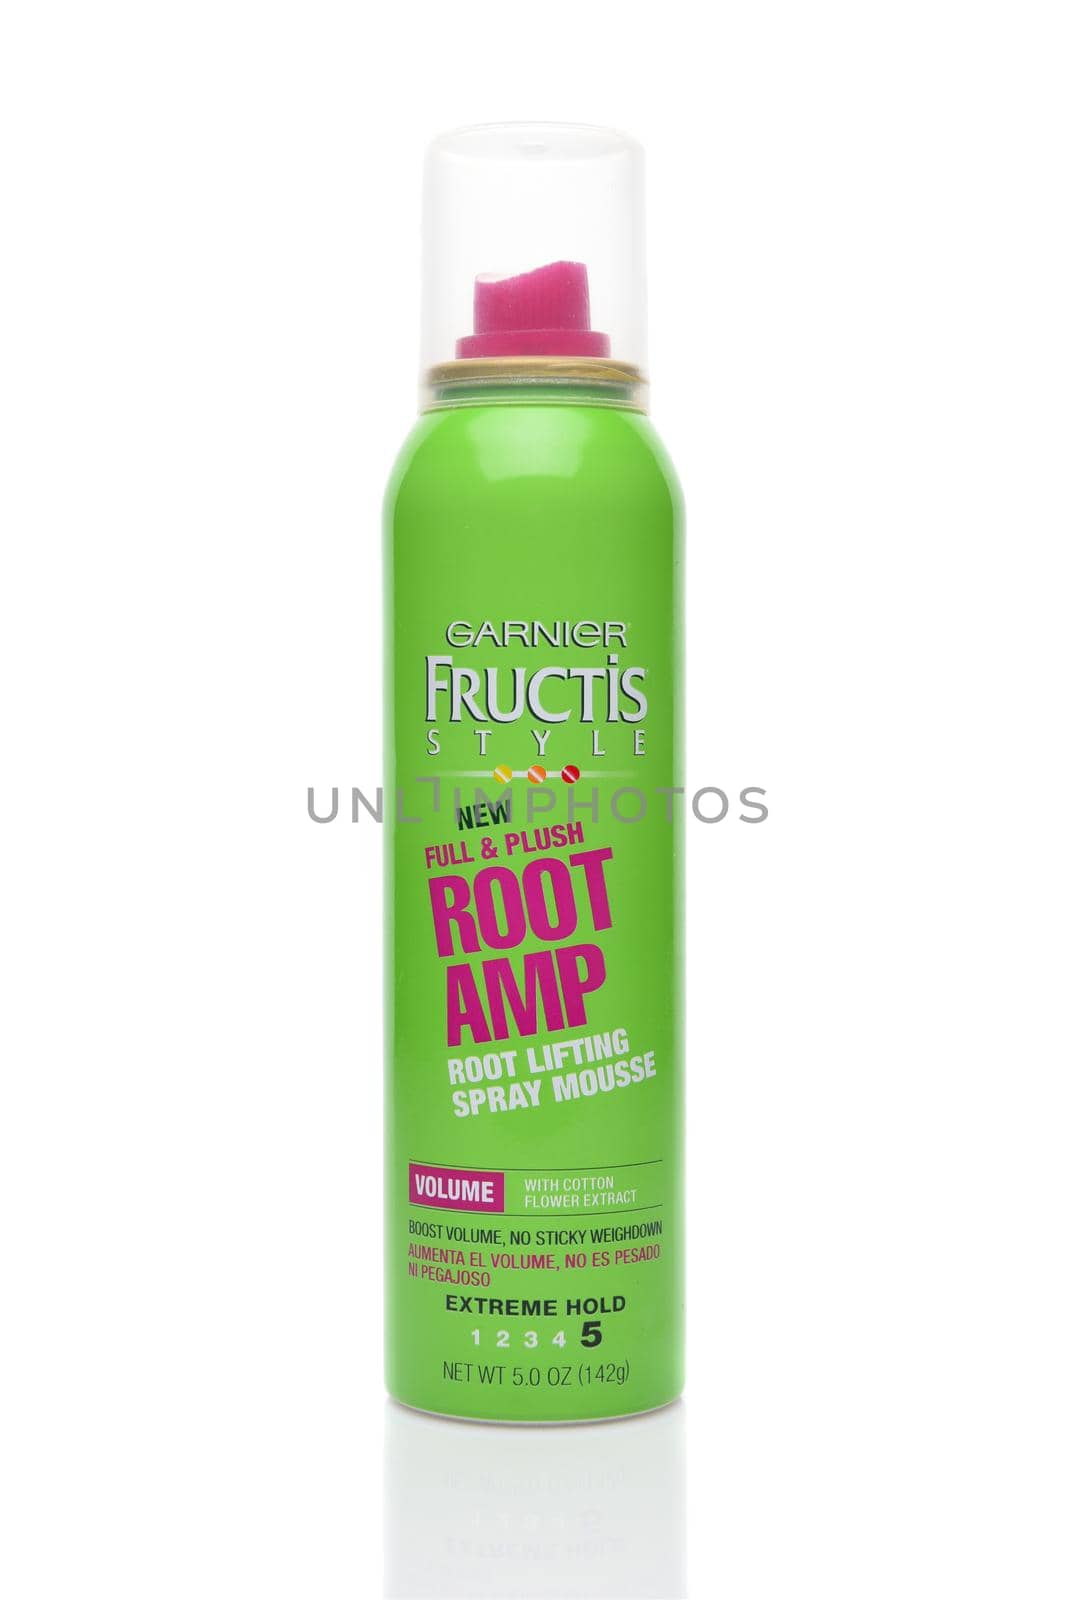 IRVINE, CALIFORNIA - AUGUST 20, 2019: A 5 ounce can of Garnier Fructis Root Amp Spray Mousse.  by sCukrov